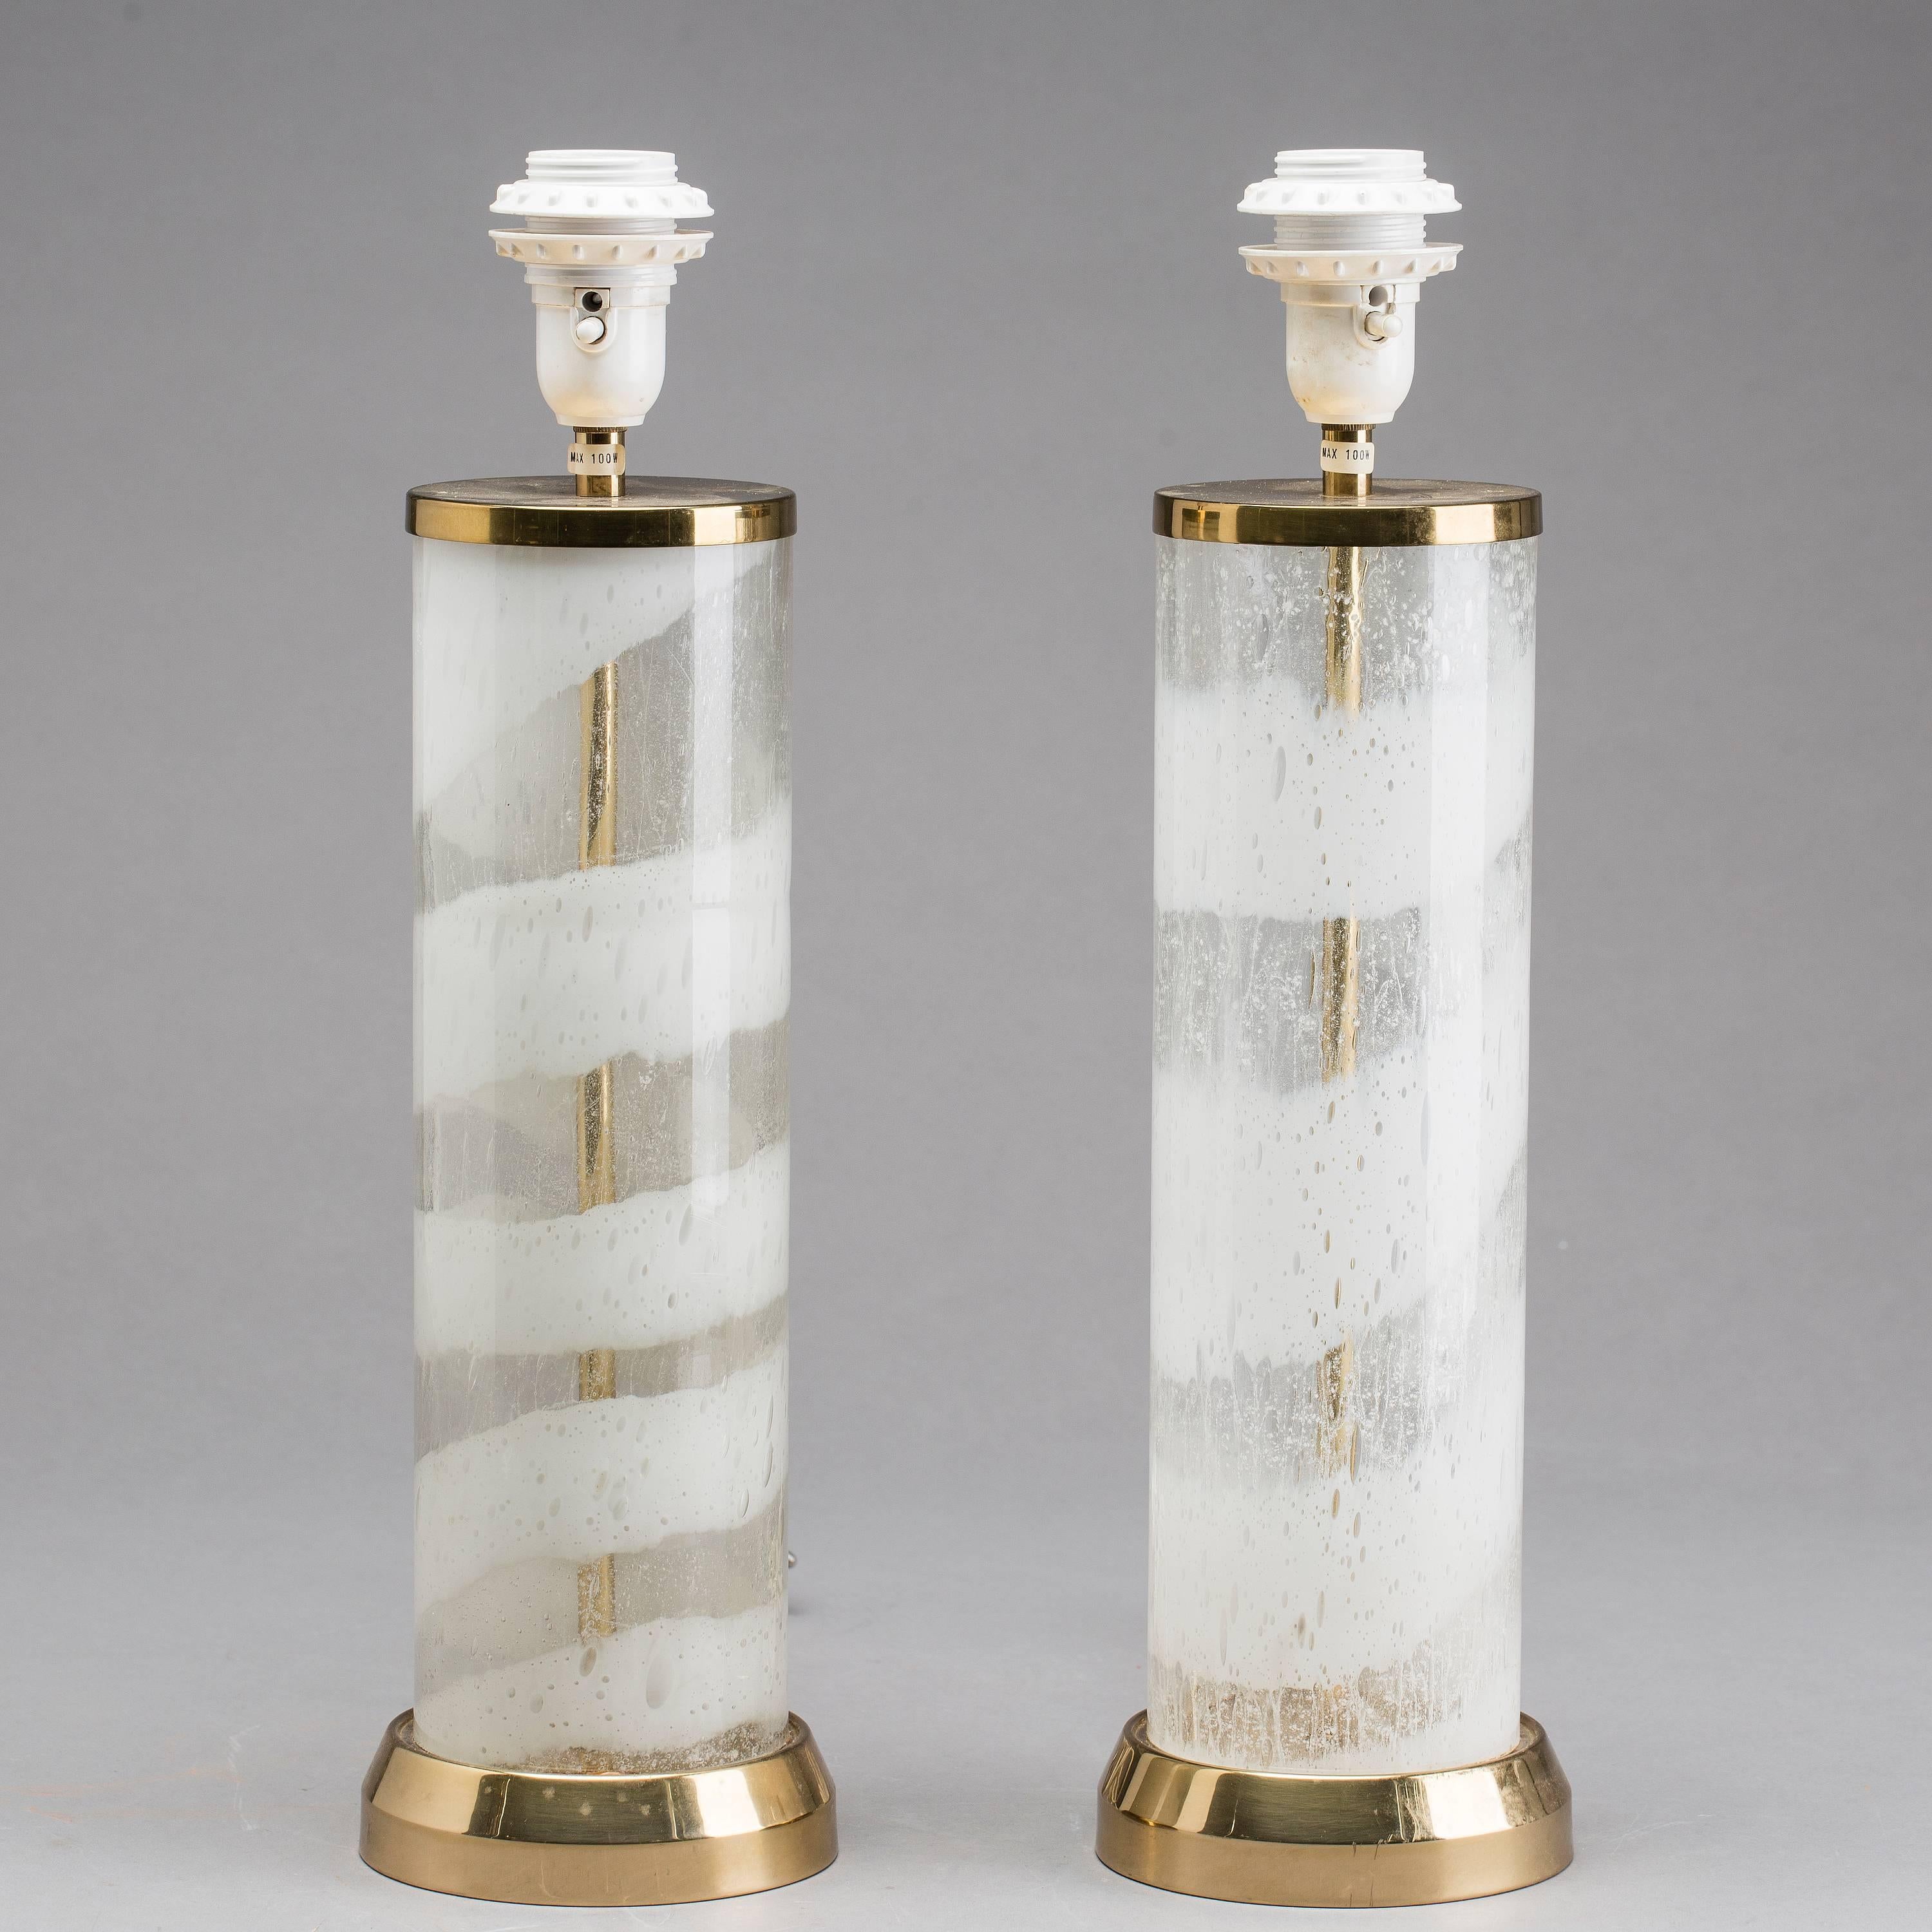 Pair of table lamps by Bergboms, Sweden, circa 1960;
Glass with inclusions of bubbles; white glass, brass.
 